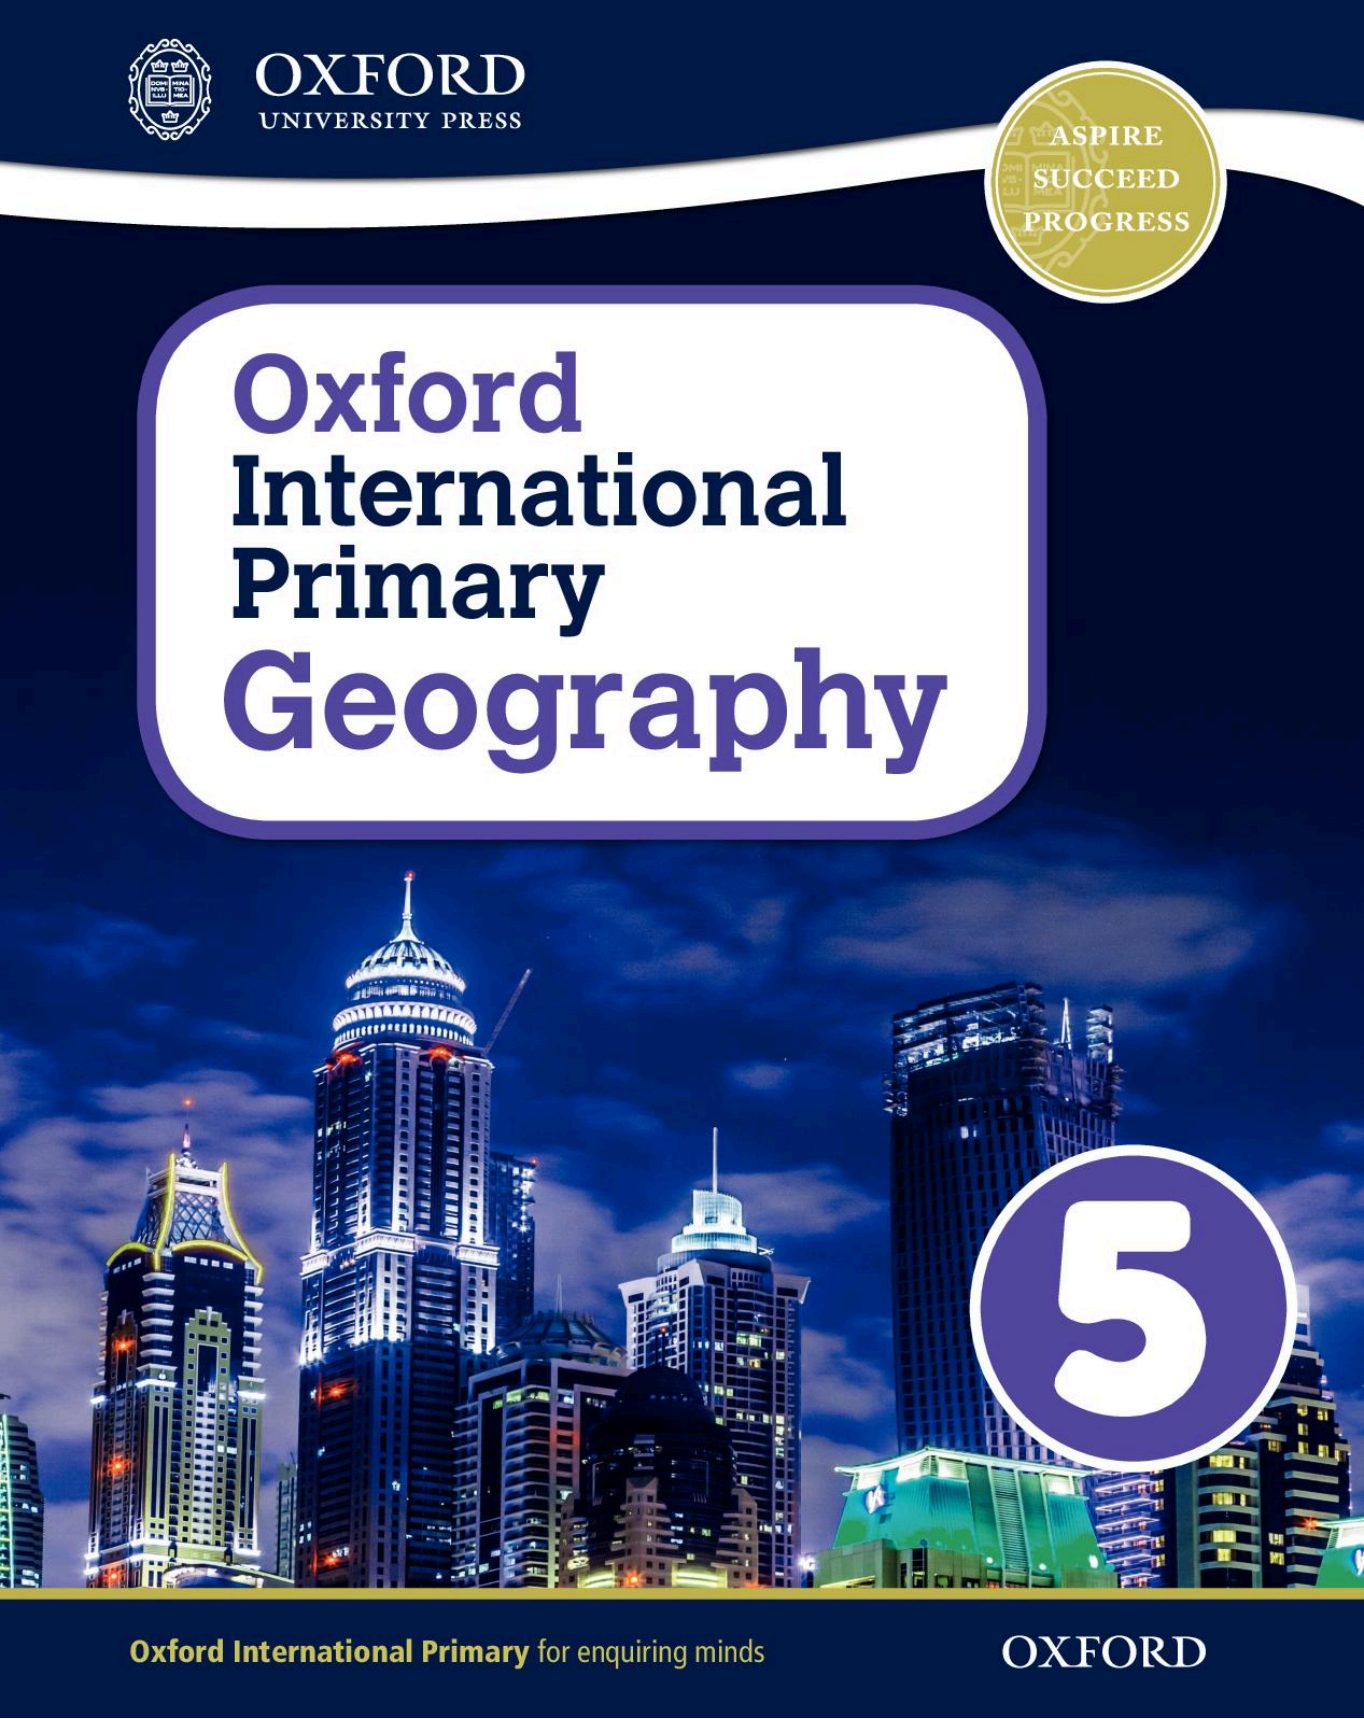 Rich Results on Google's SERP when searching for 'Oxford International Primary Geography 5'